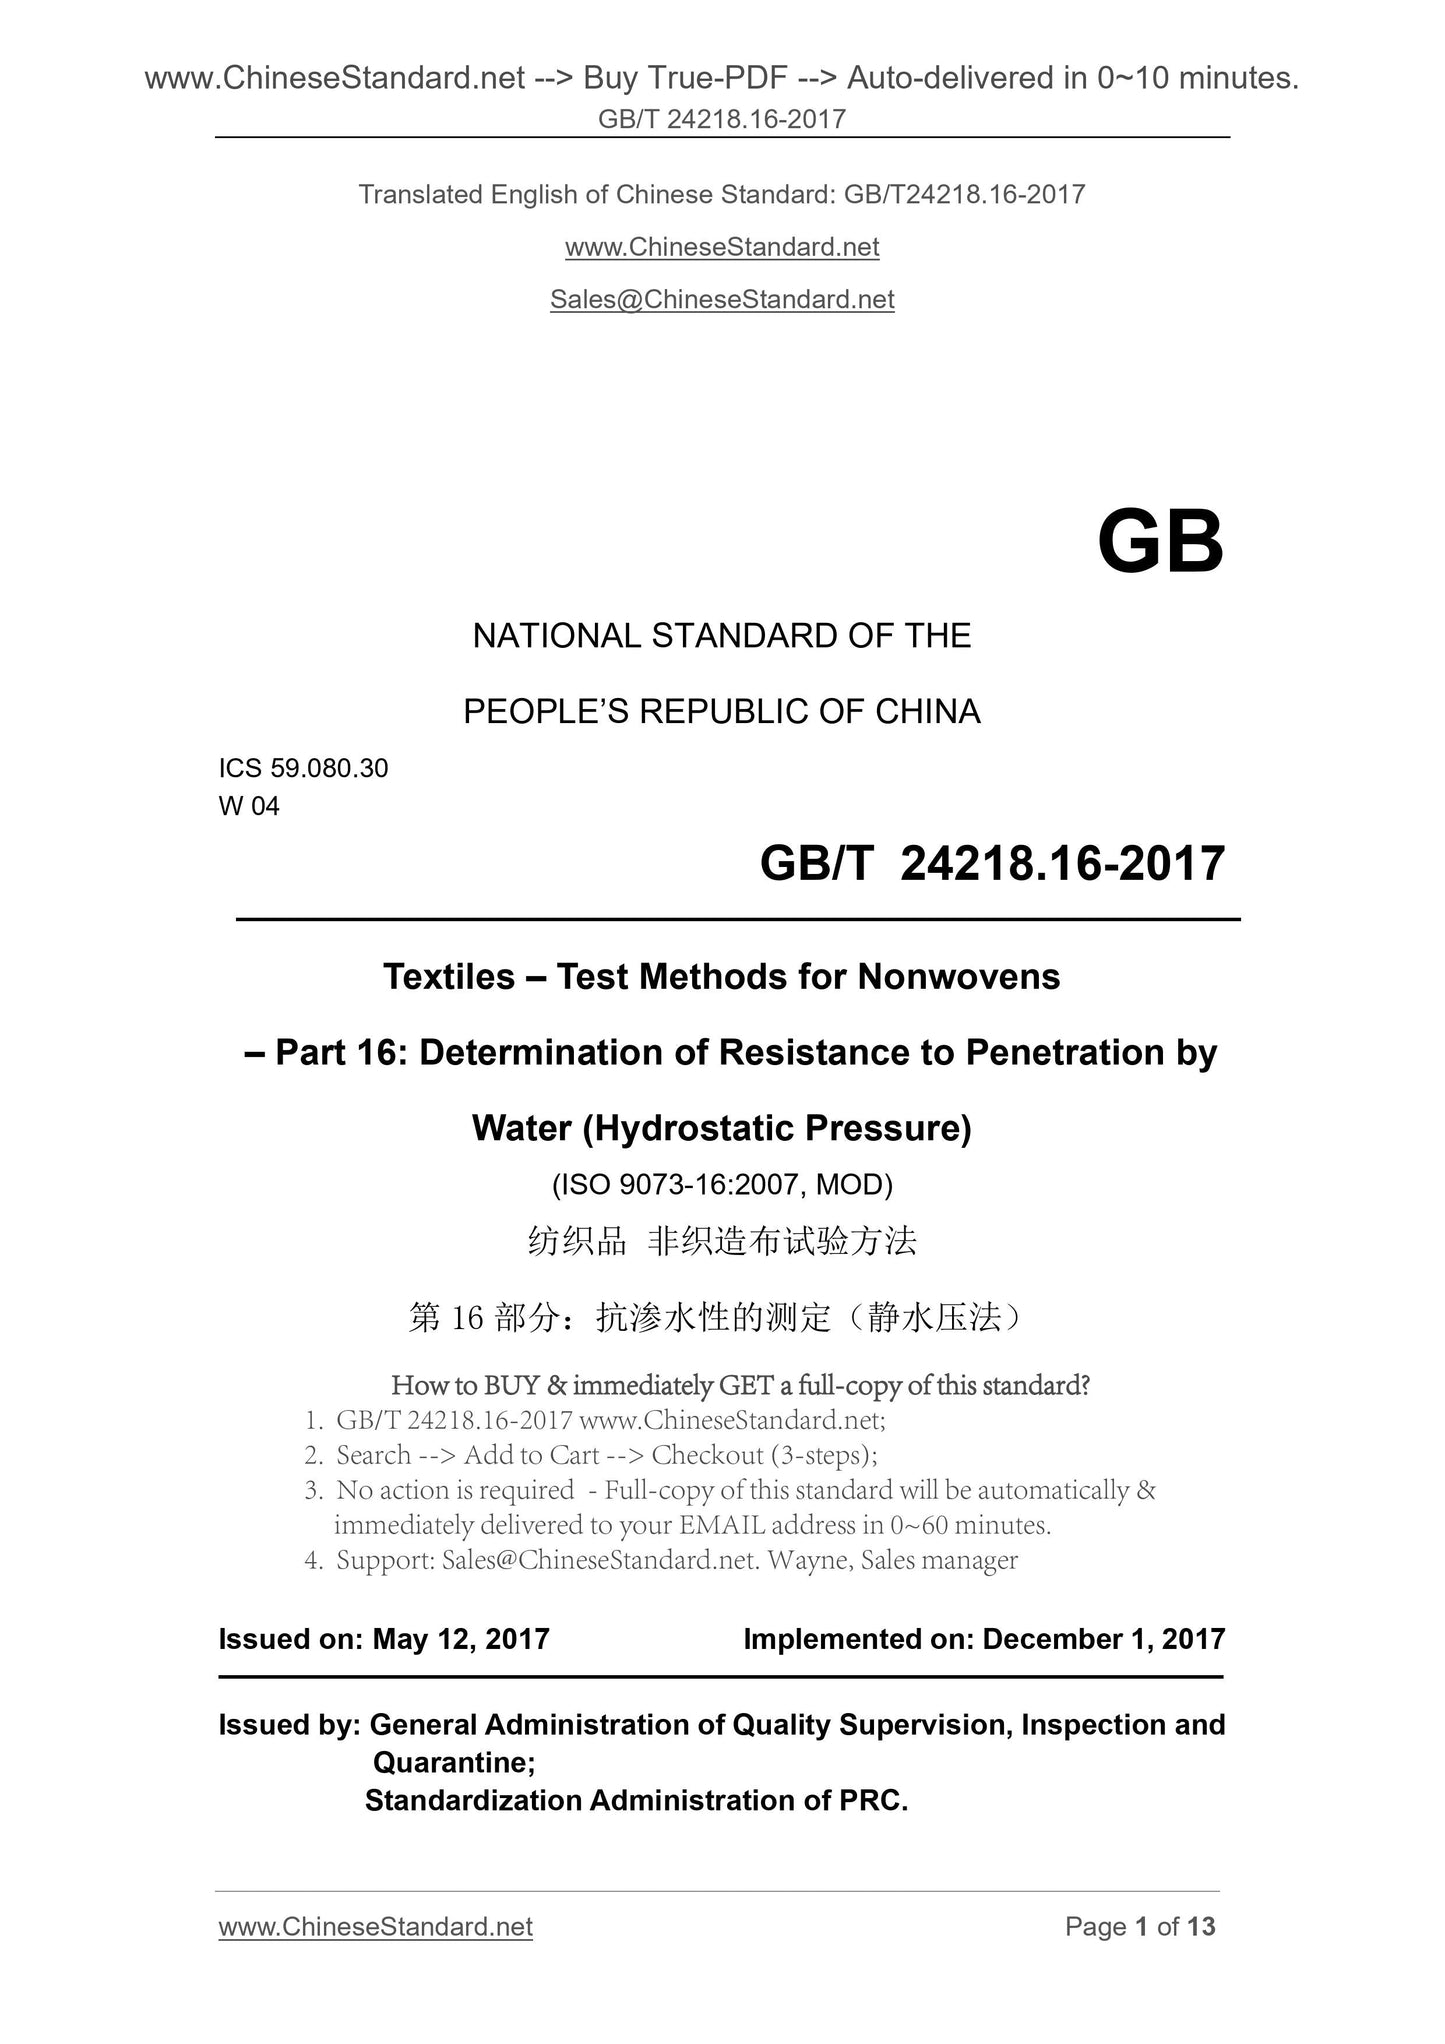 GB/T 24218.16-2017 Page 1